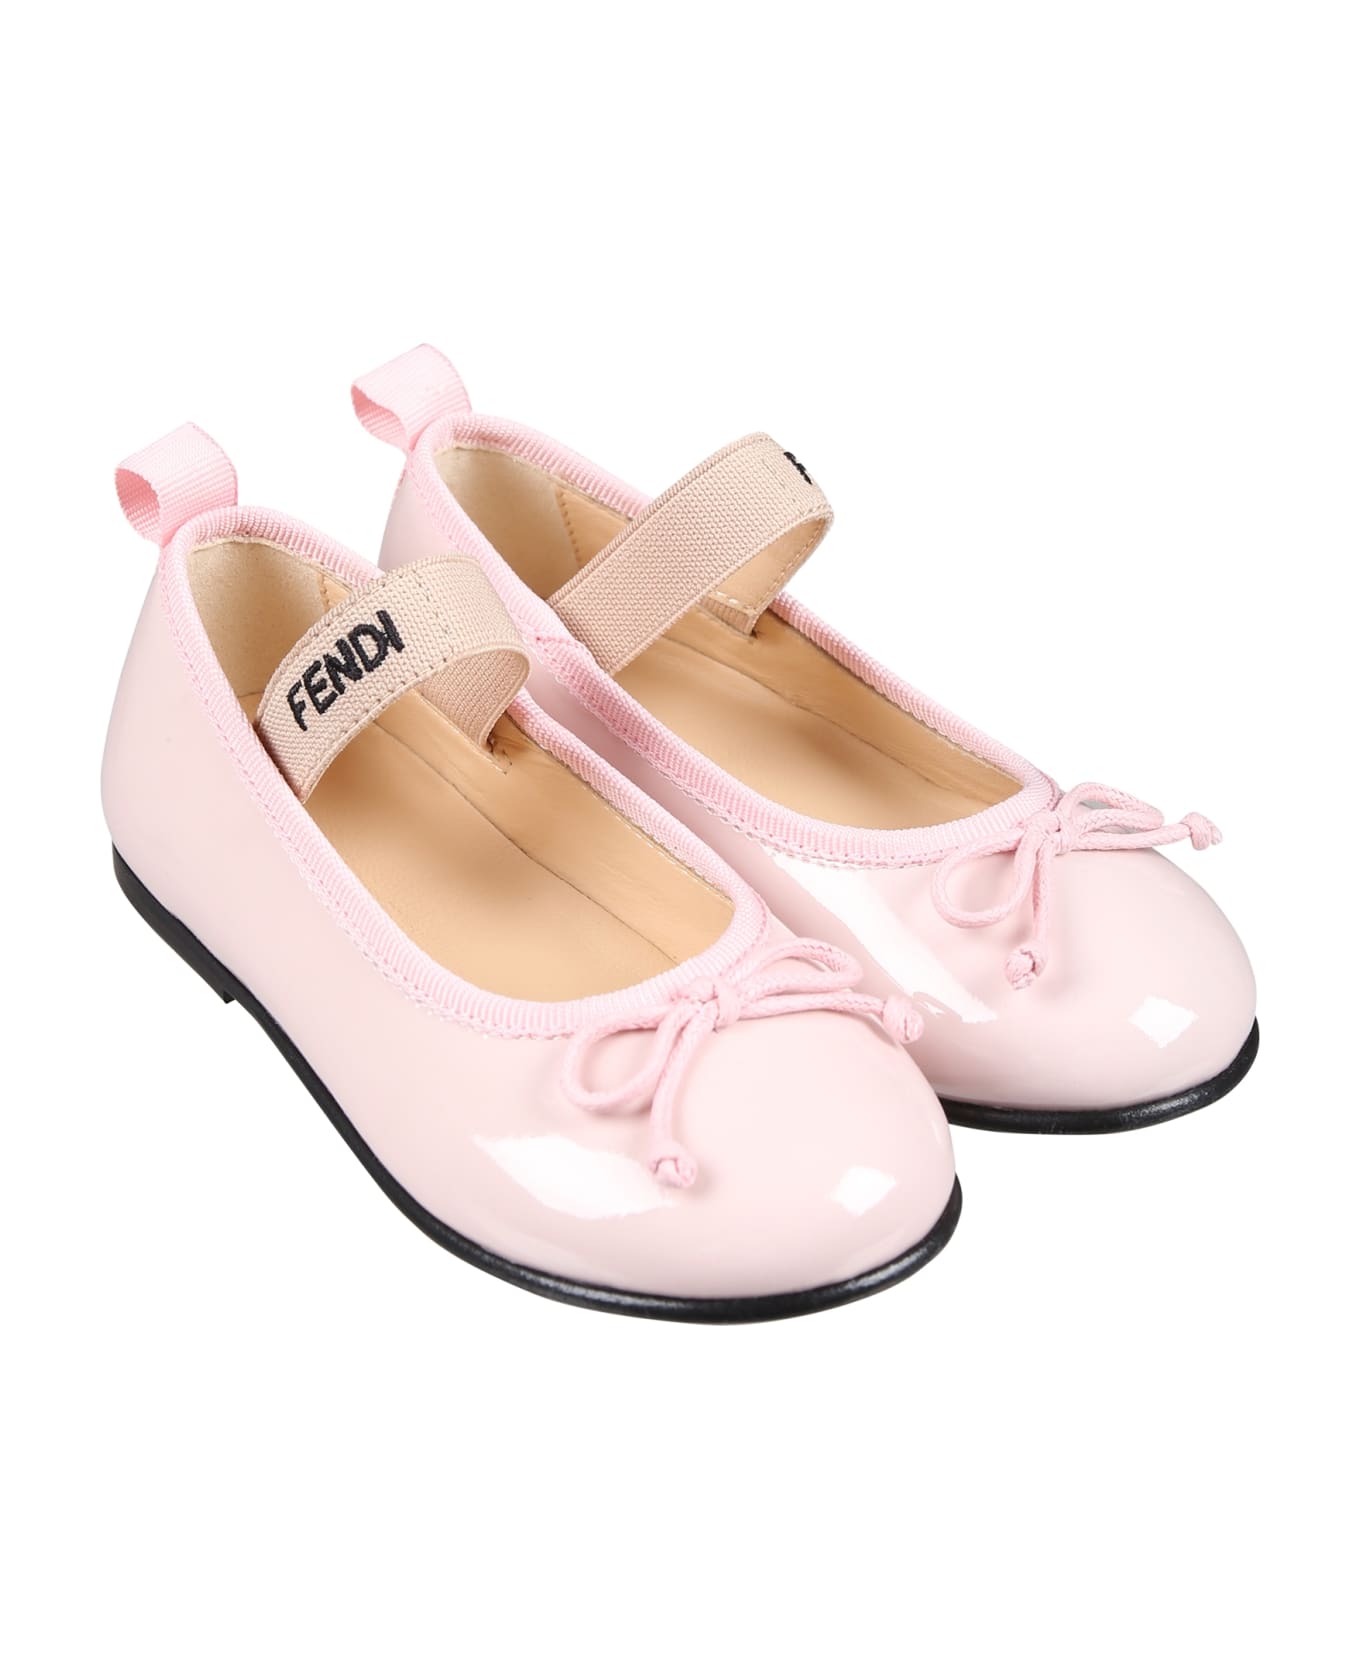 Fendi Pink Ballet Flat For Baby Girl With Logo - Pink